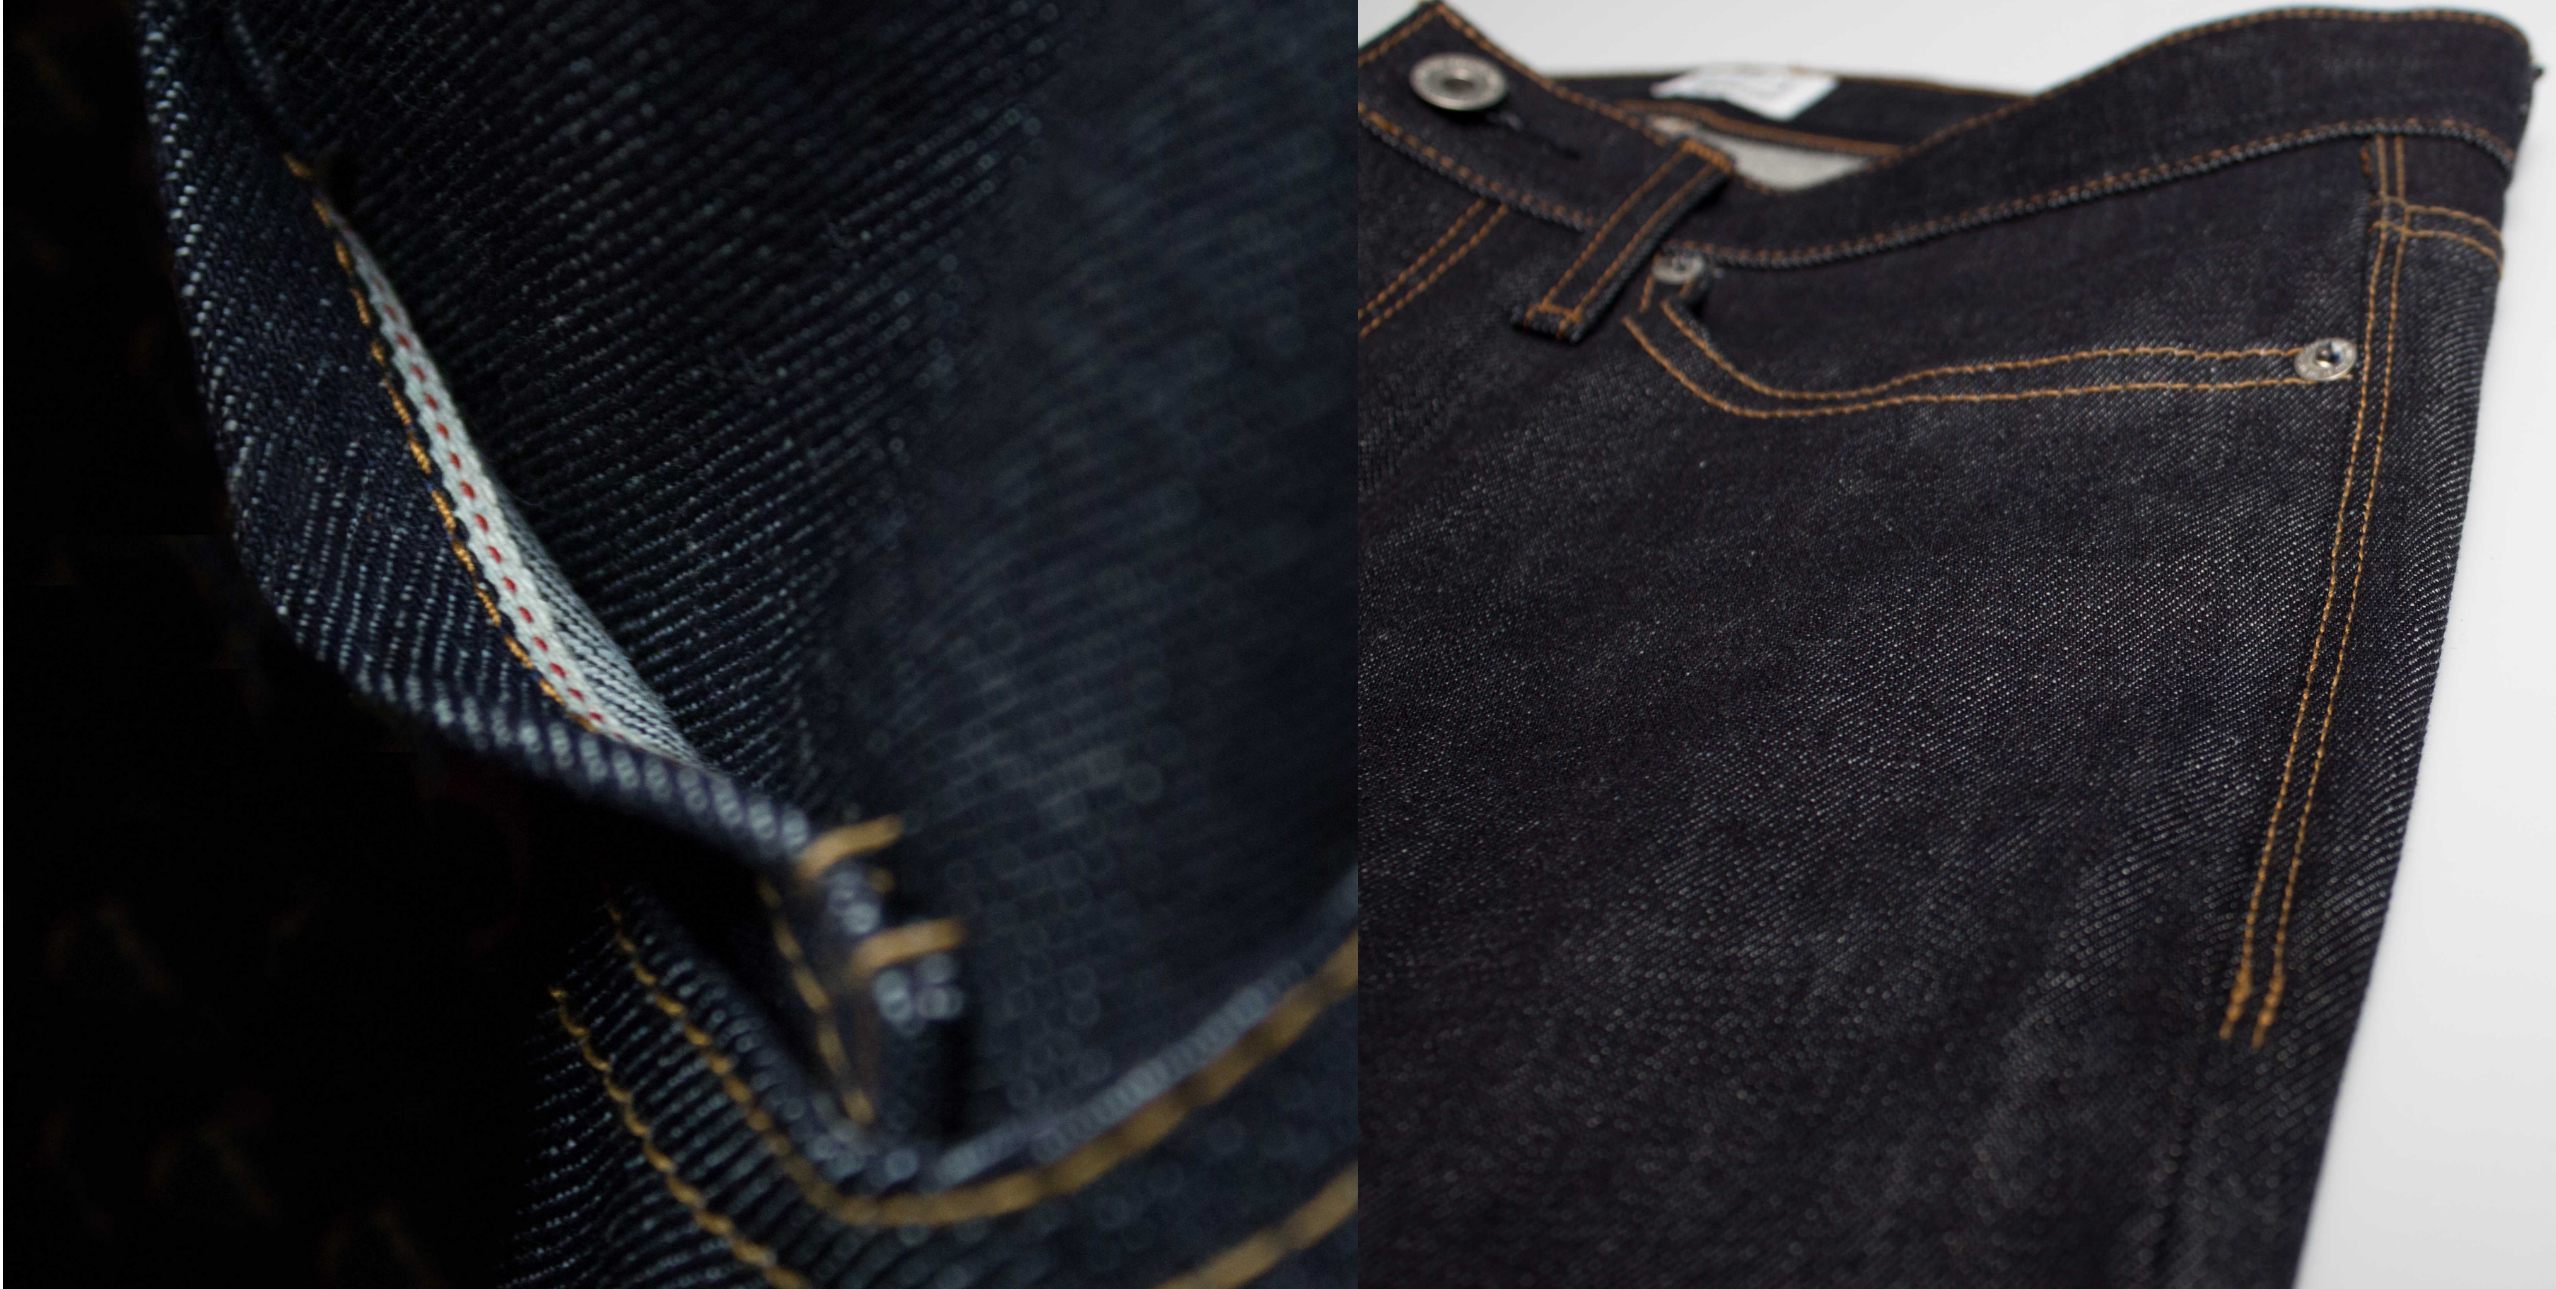 Introducing Copin Denim - Driven By Diligence, Striving For Perfection